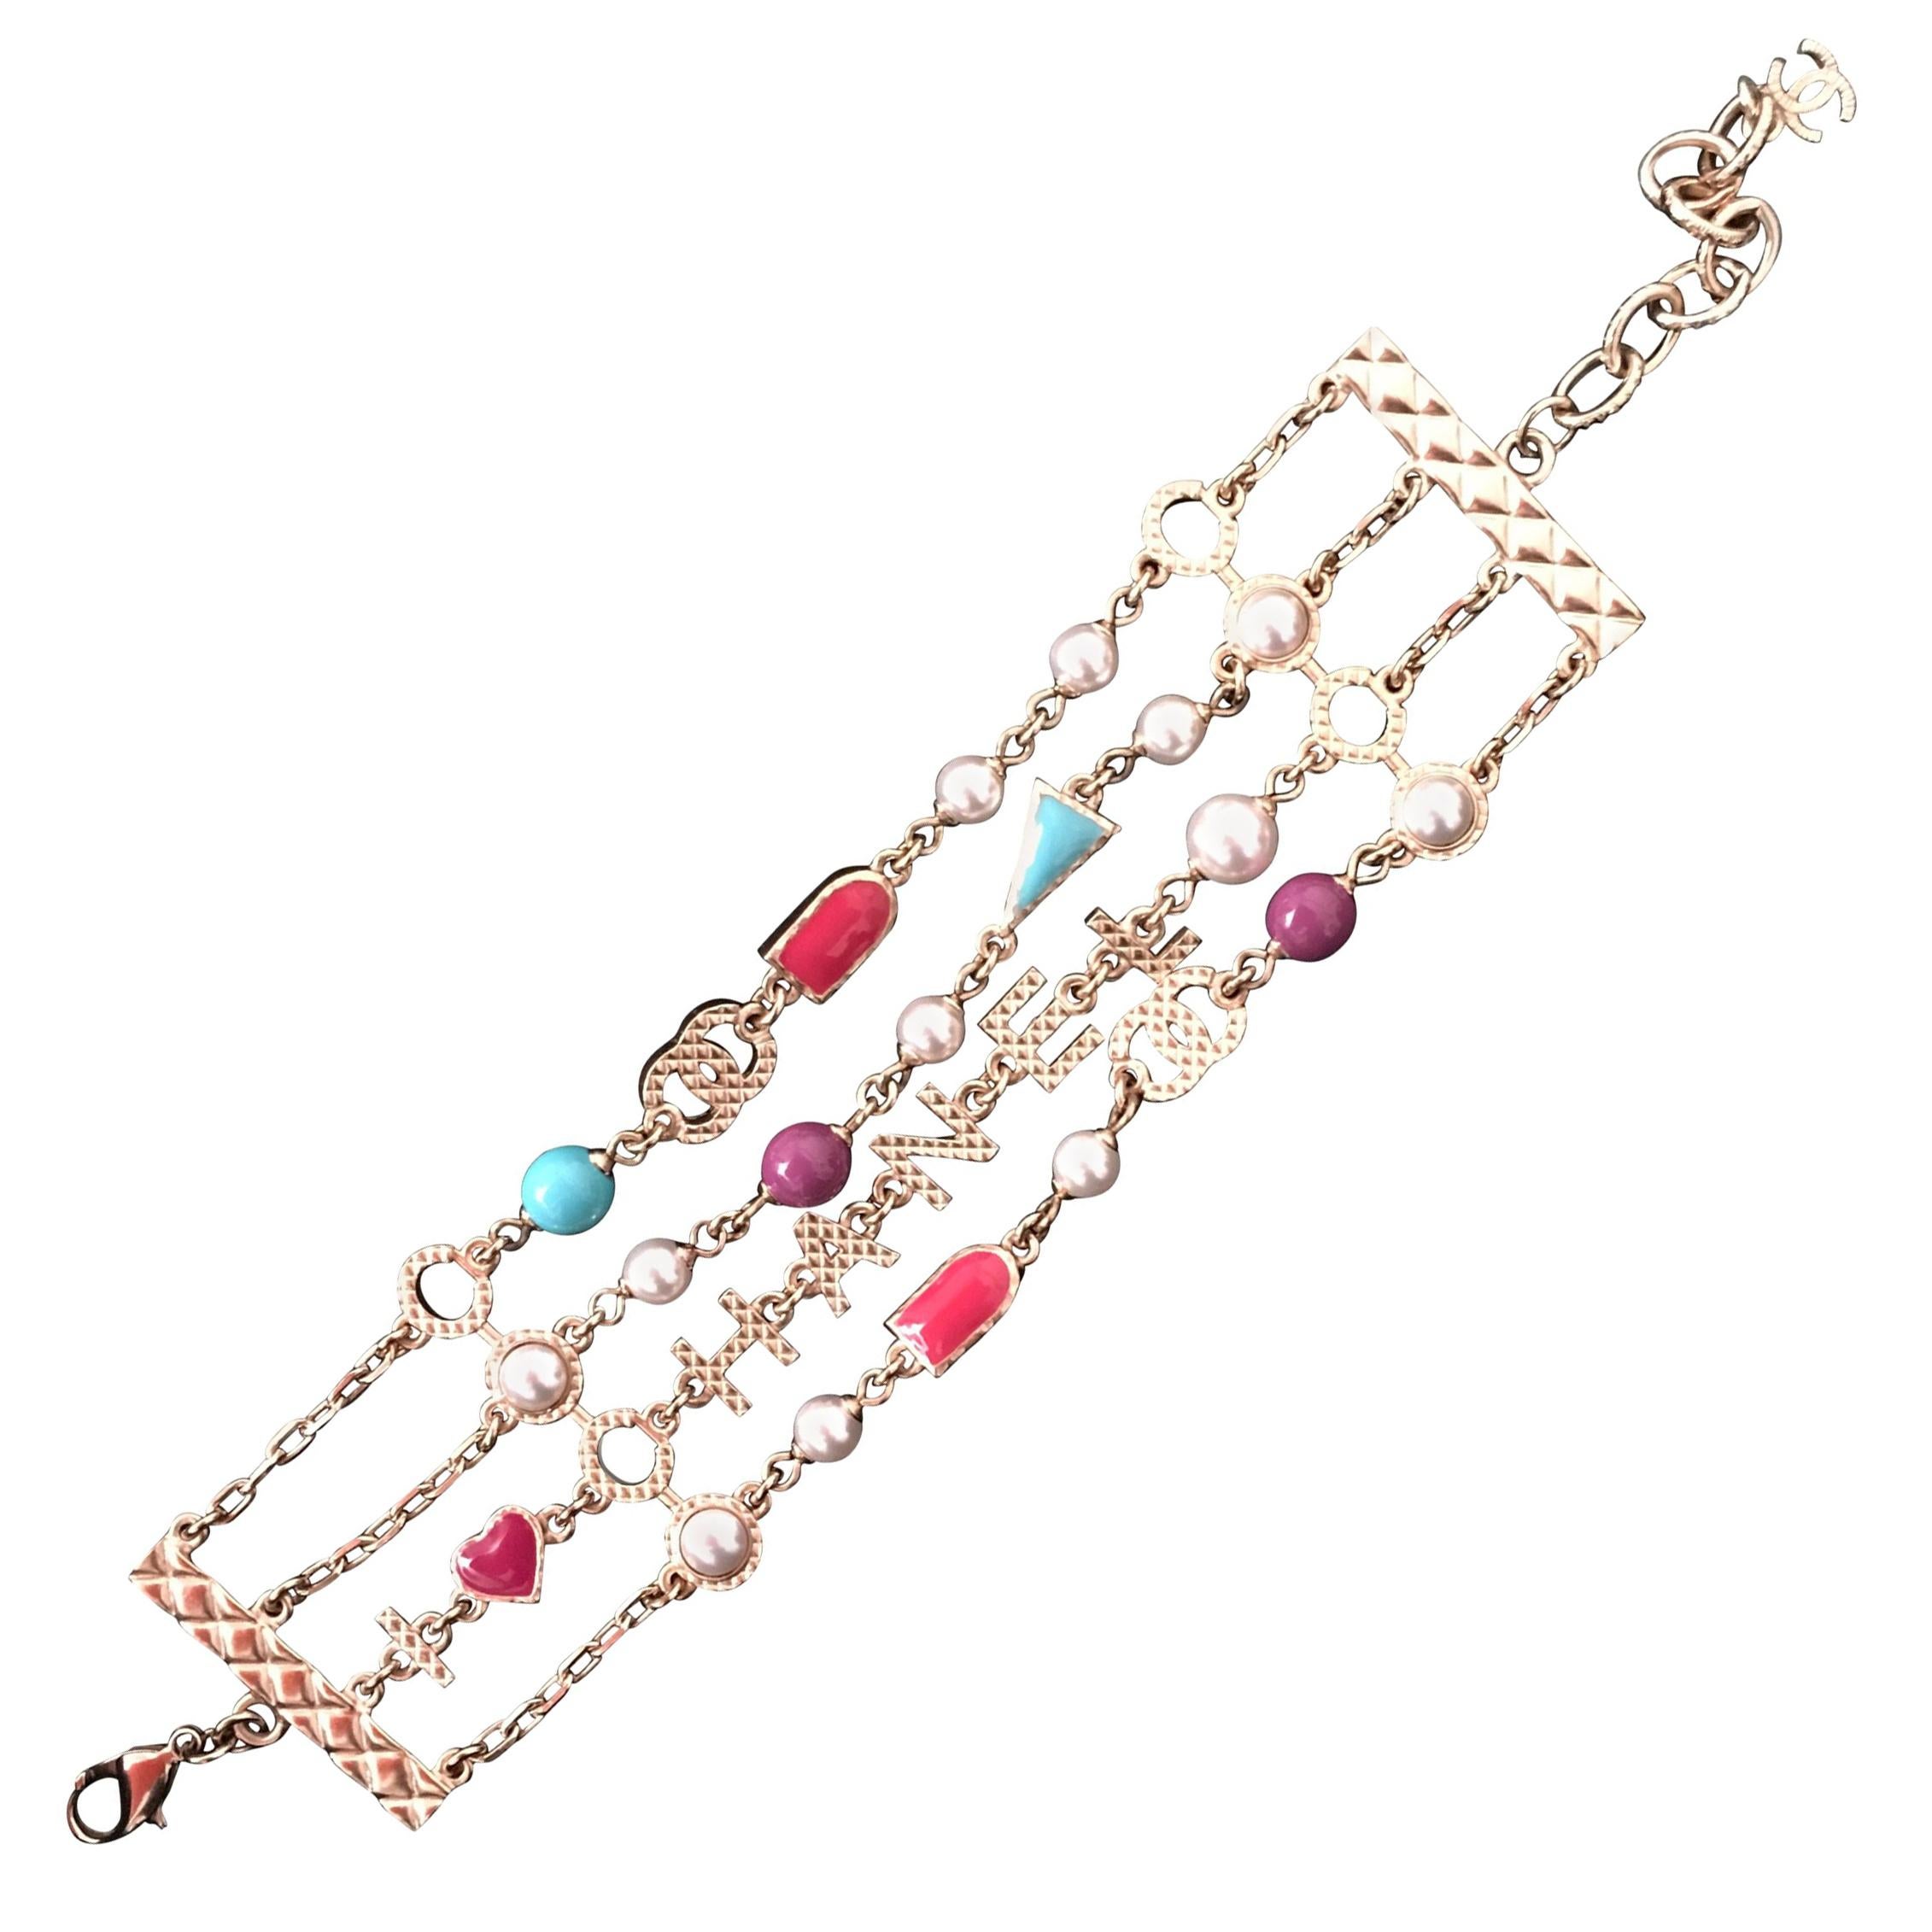 Beige New Chanel Bracelet Pearl and Multi coloreded  AWESOME